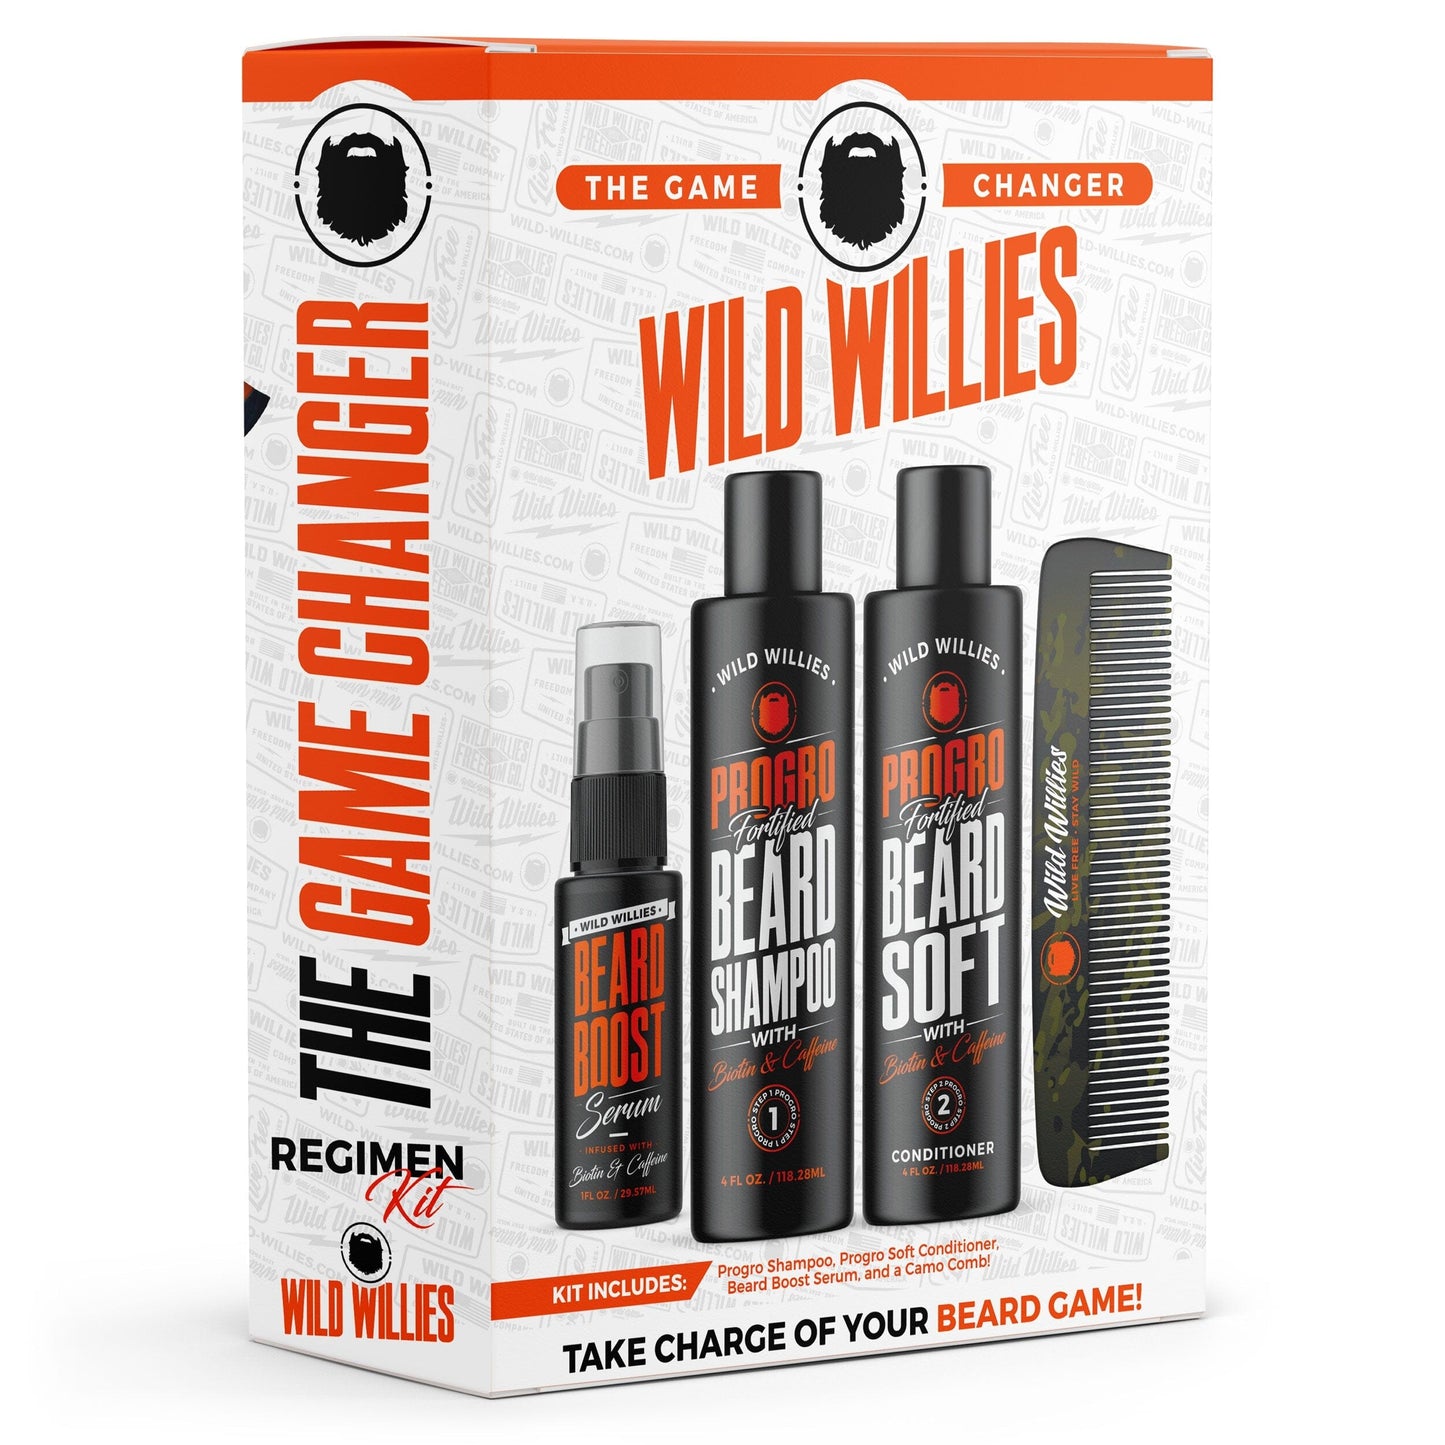 The Game Changer Wild-Willies 